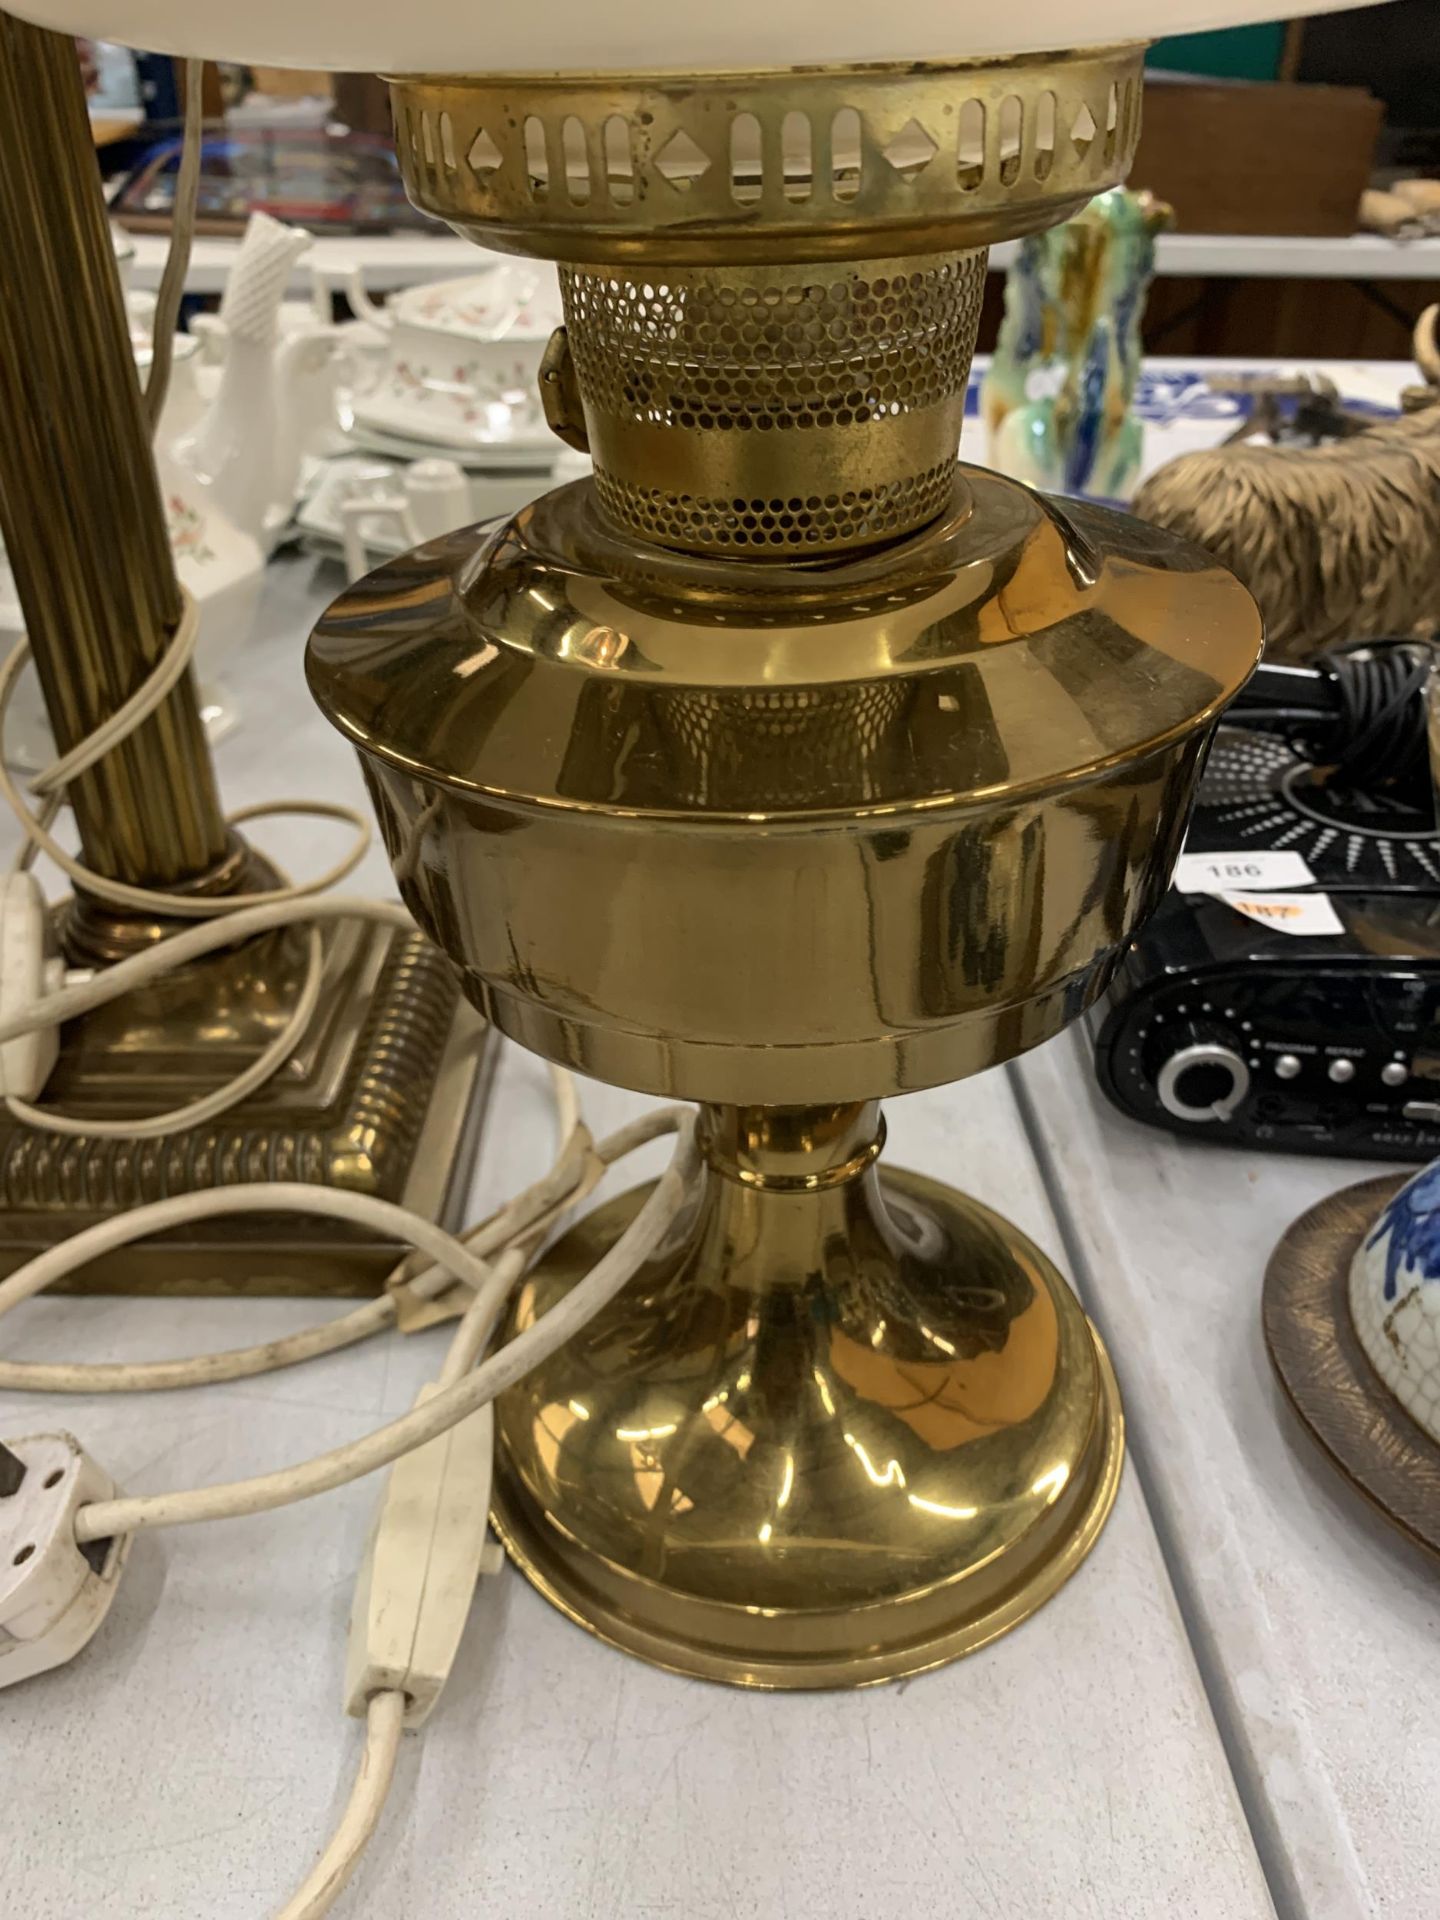 TWO VINTAGE BRASS OIL LAMPS CONVERTED TO ELECTRICITY - Image 2 of 5